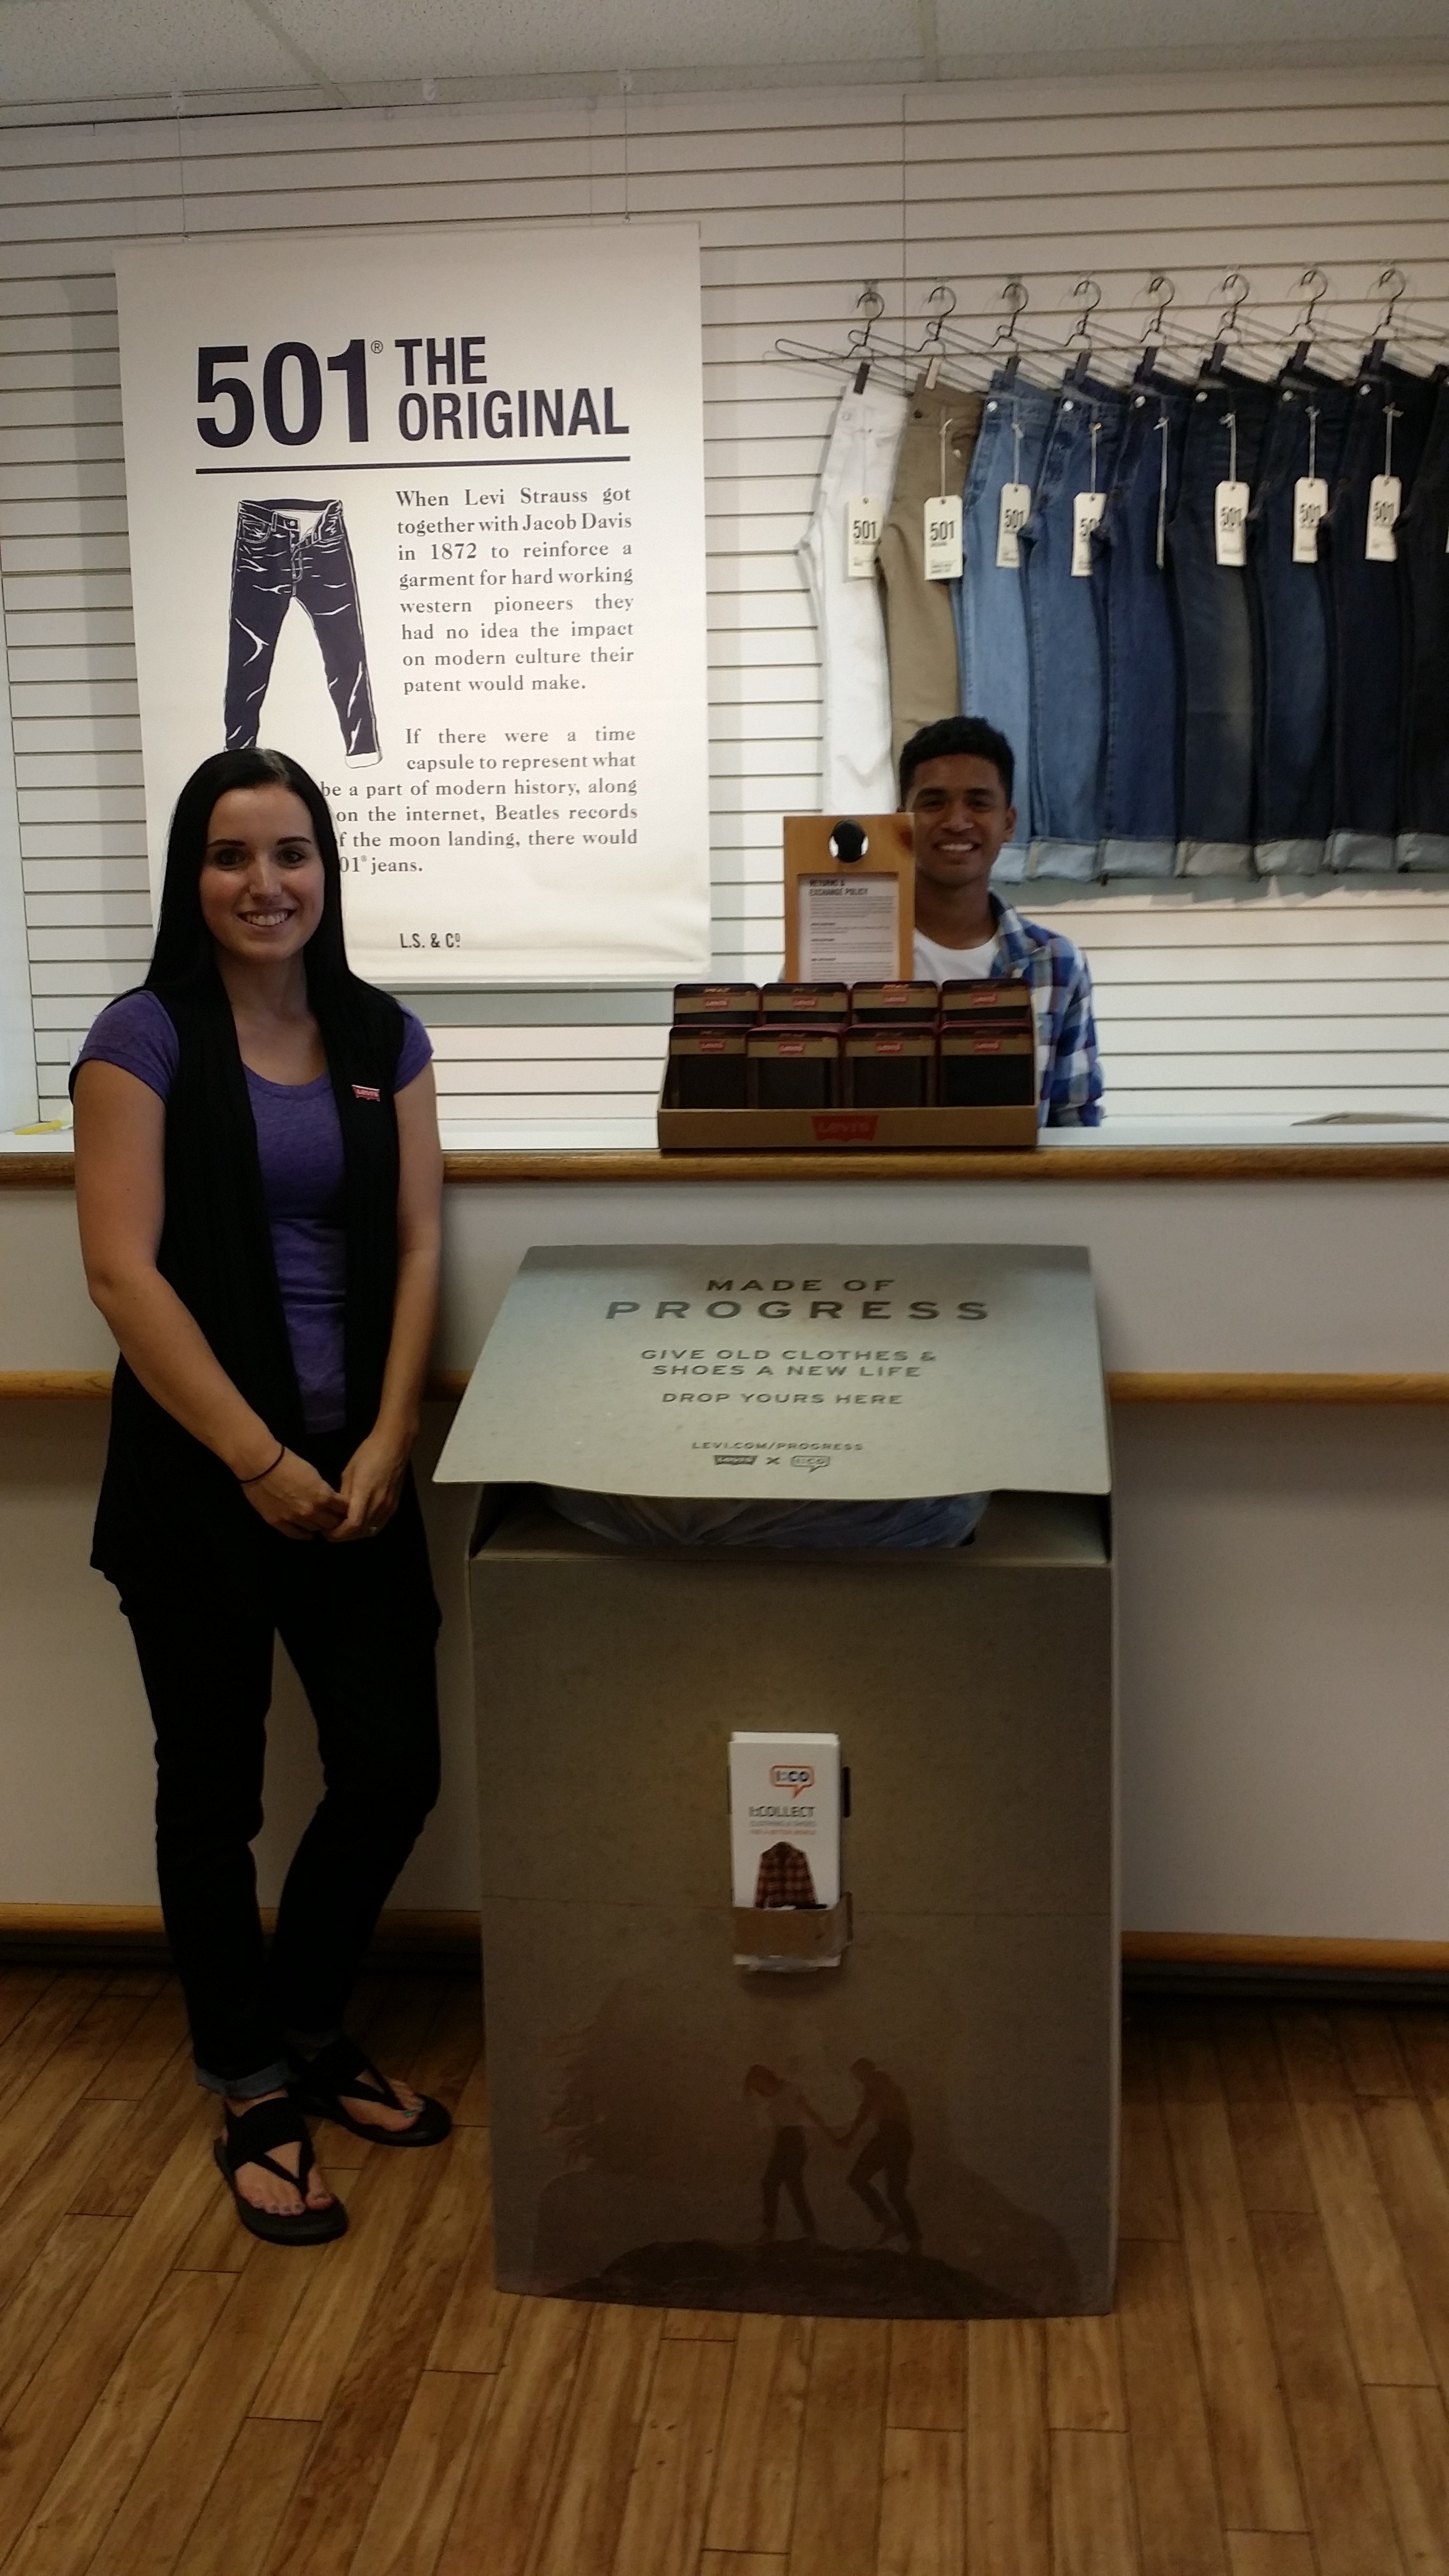 Clothing outlet seeks to recycle old clothes; donors receive coupons – St George News